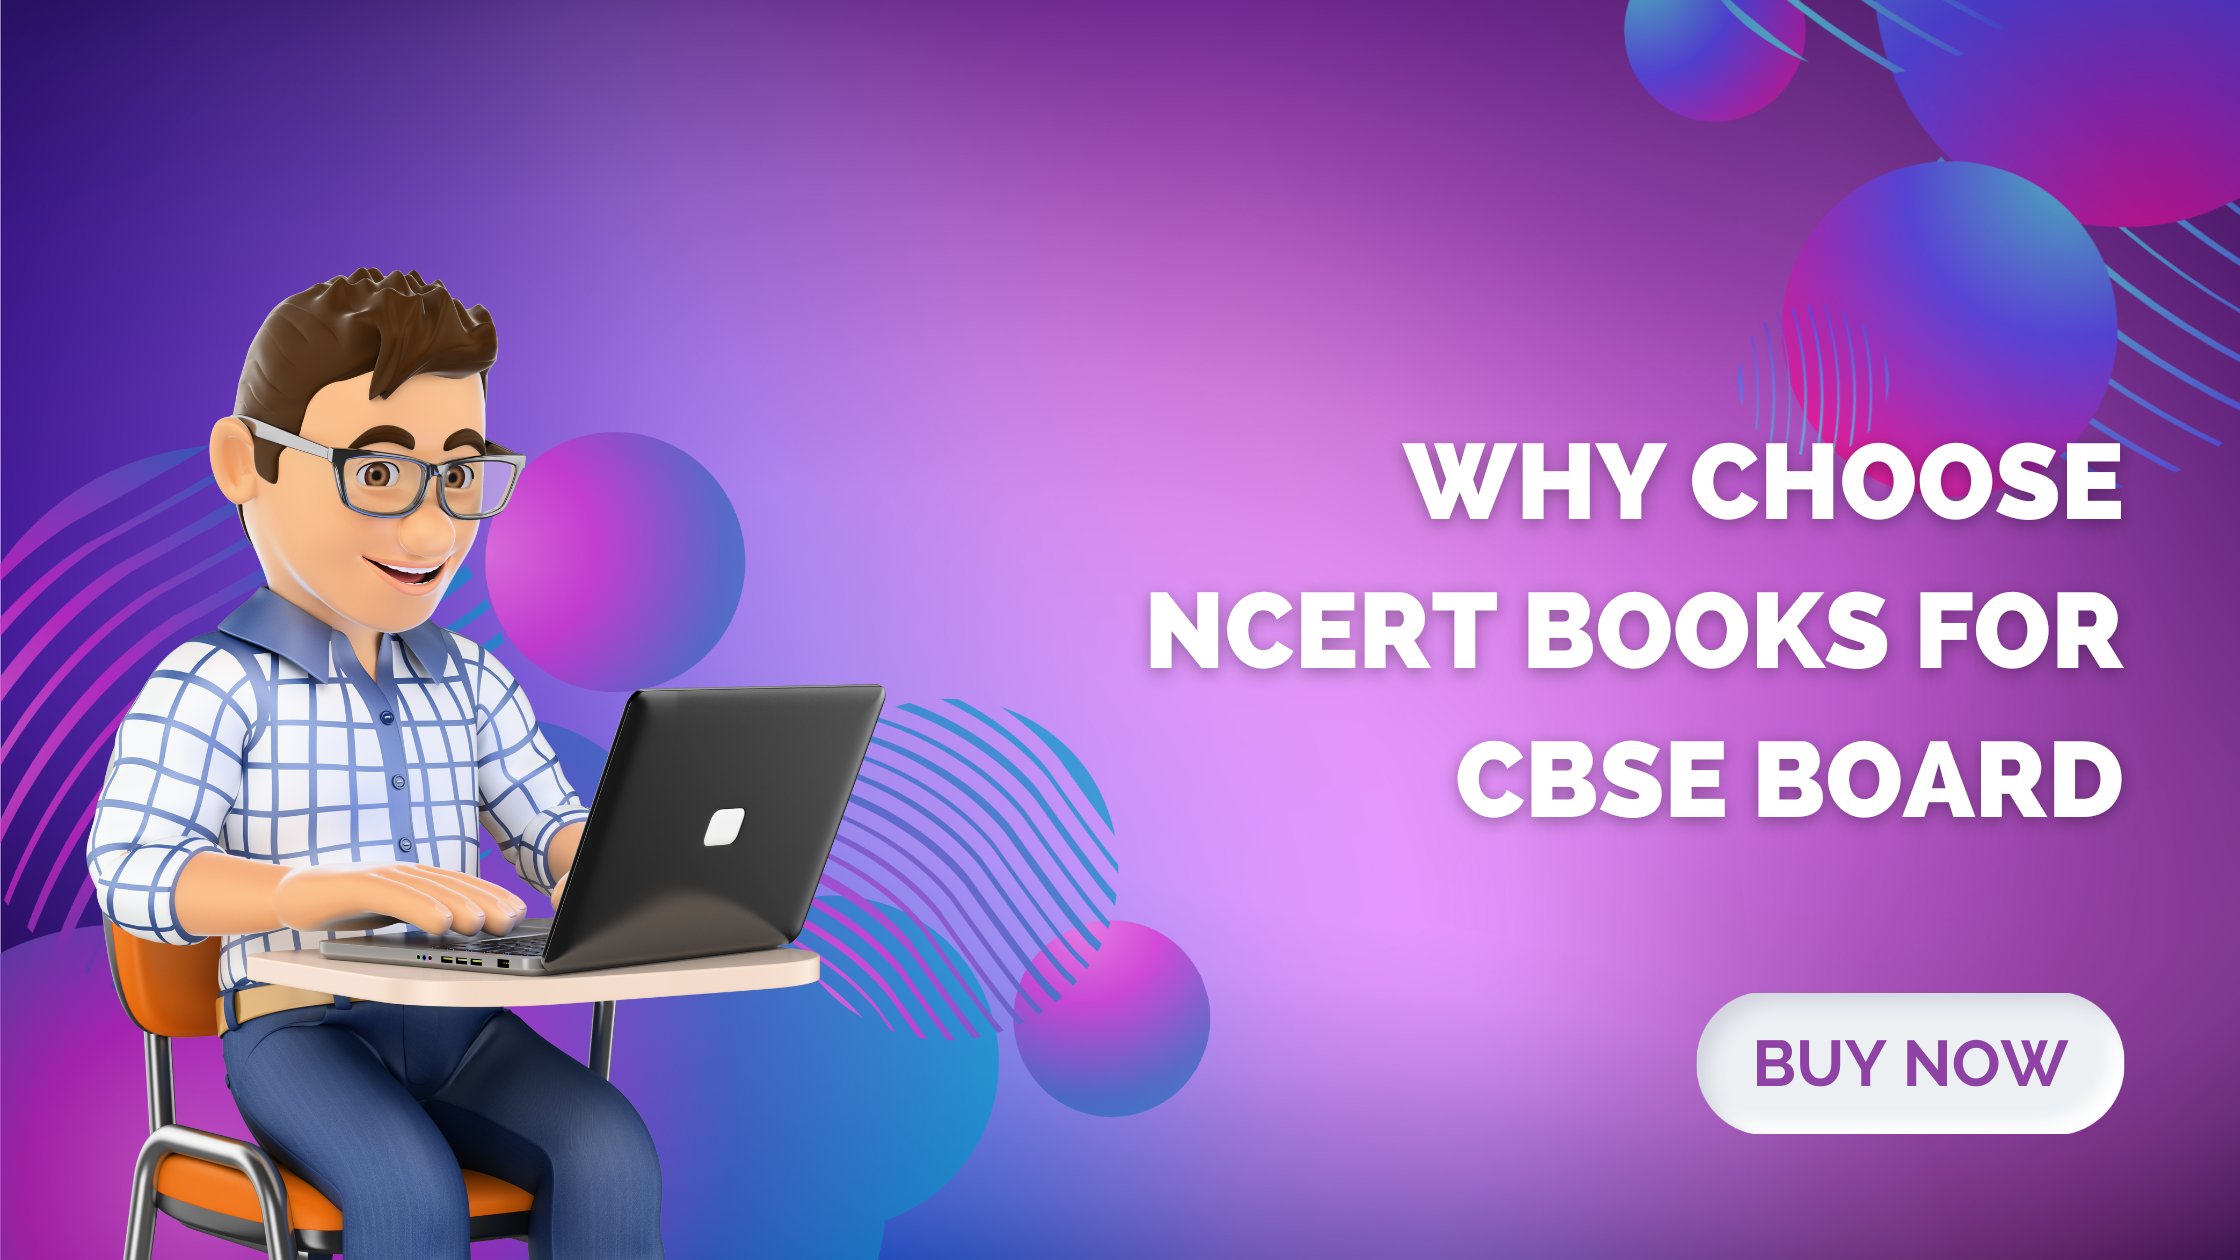 Why Choose NCERT Books for CBSE Board